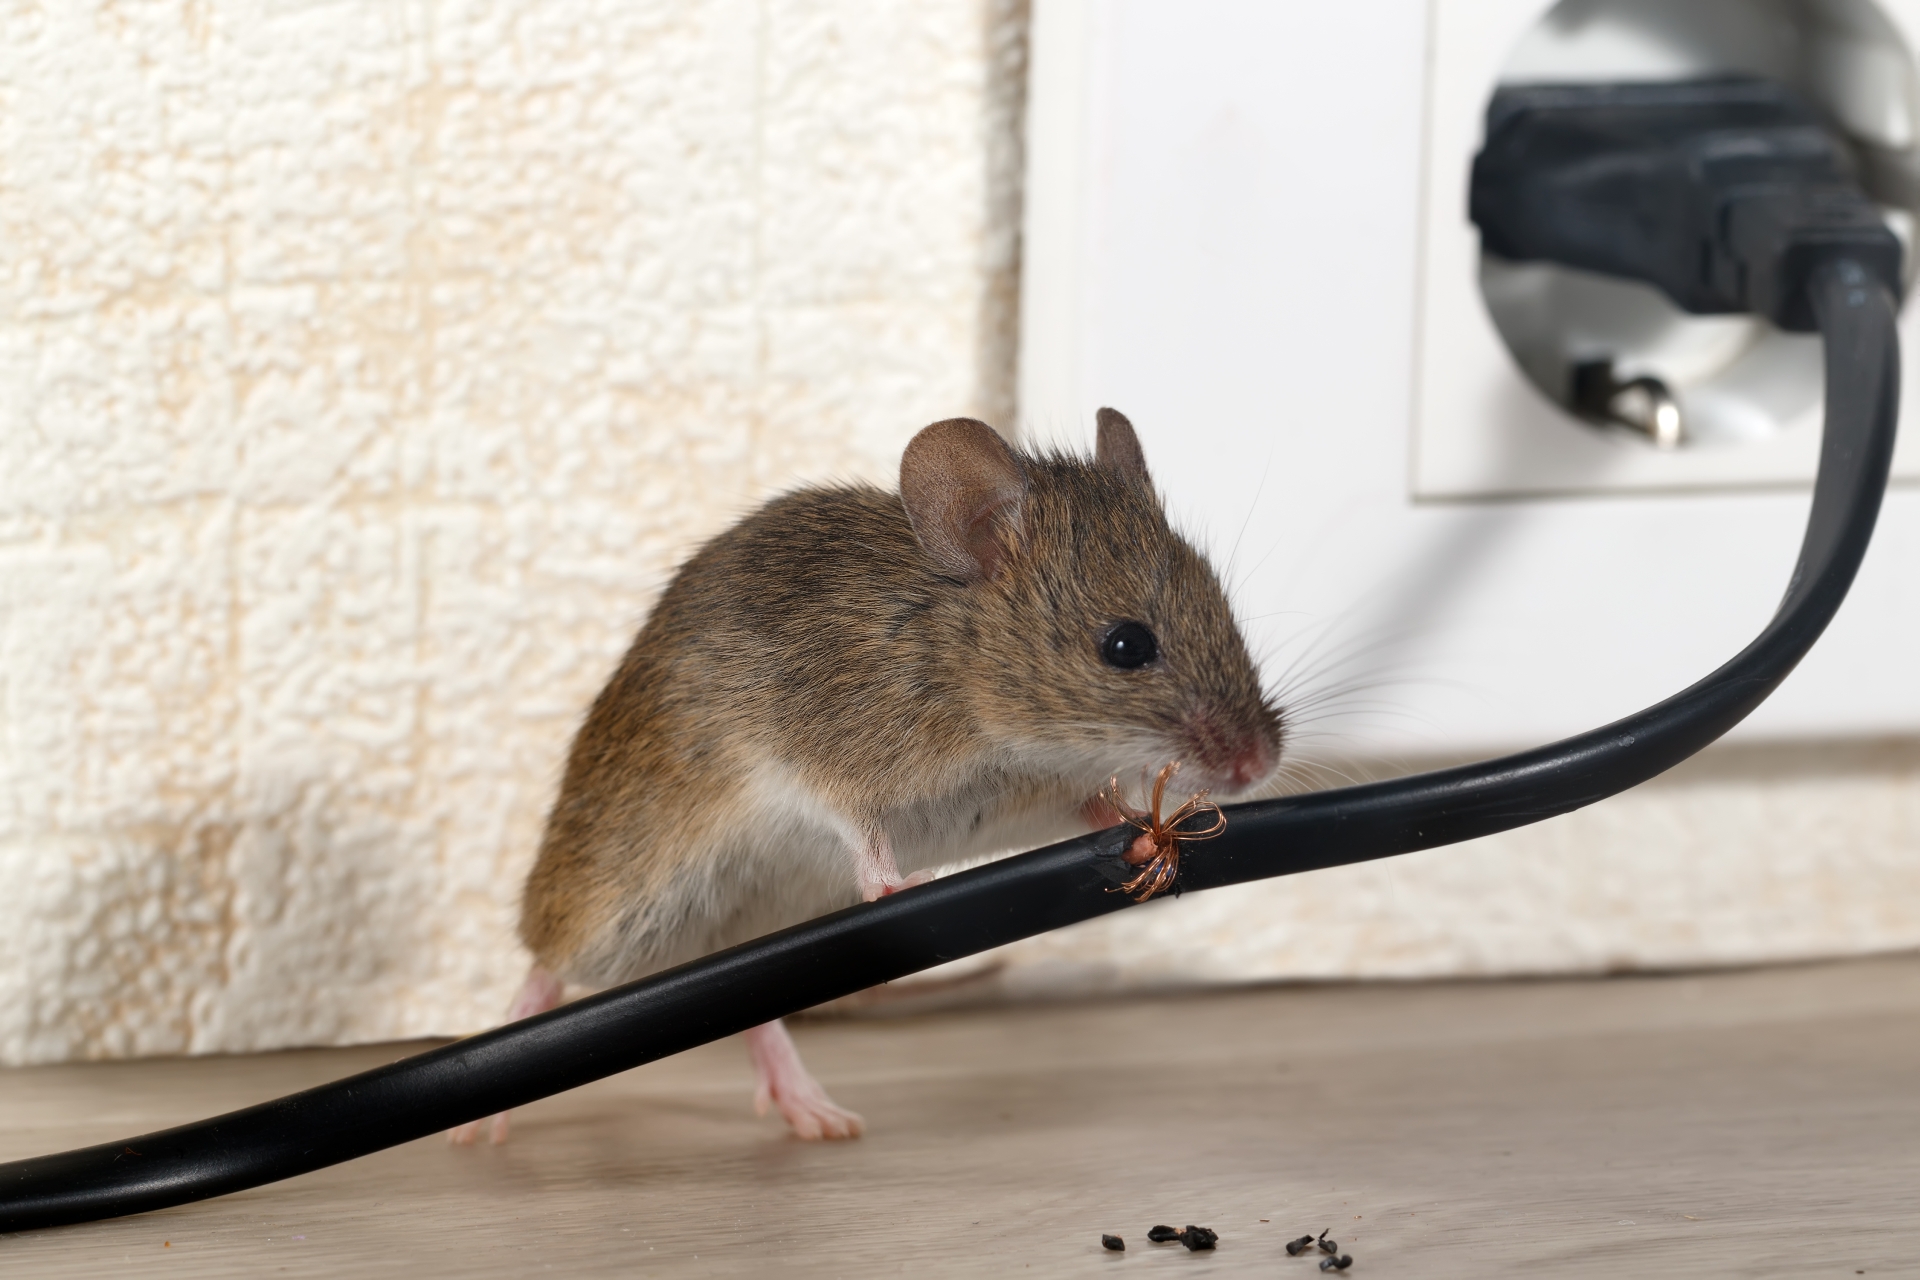 Mice Infestation, Pest Control in Leytonstone, E11. Call Now 020 8166 9746